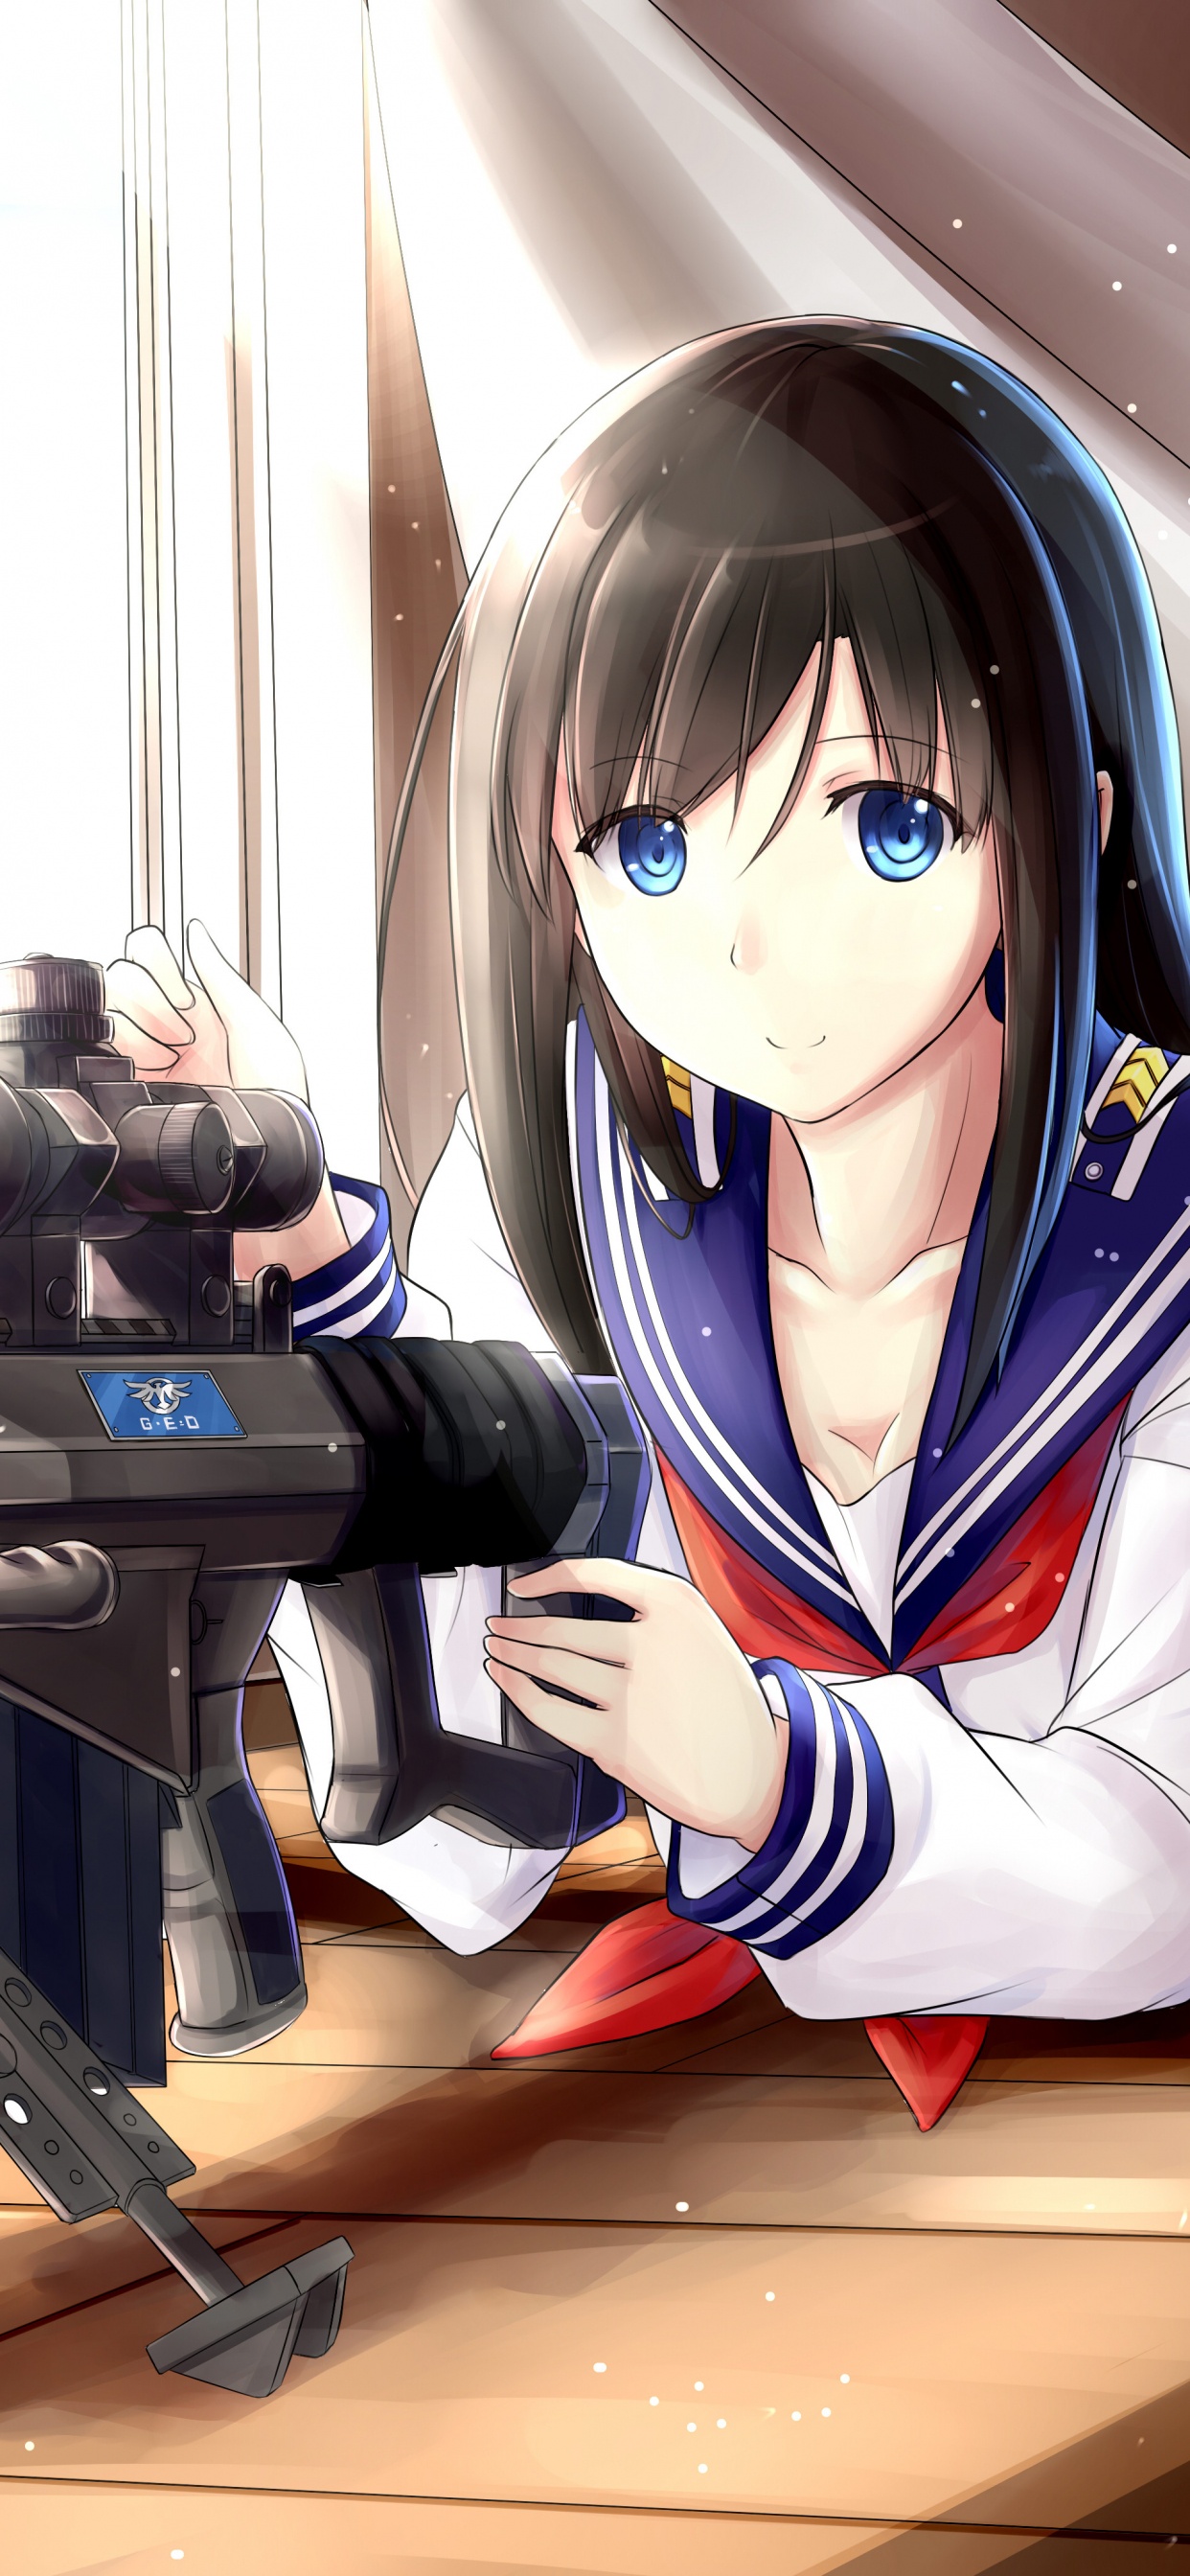 Woman in White and Blue Jacket Holding Black Rifle. Wallpaper in 1242x2688 Resolution